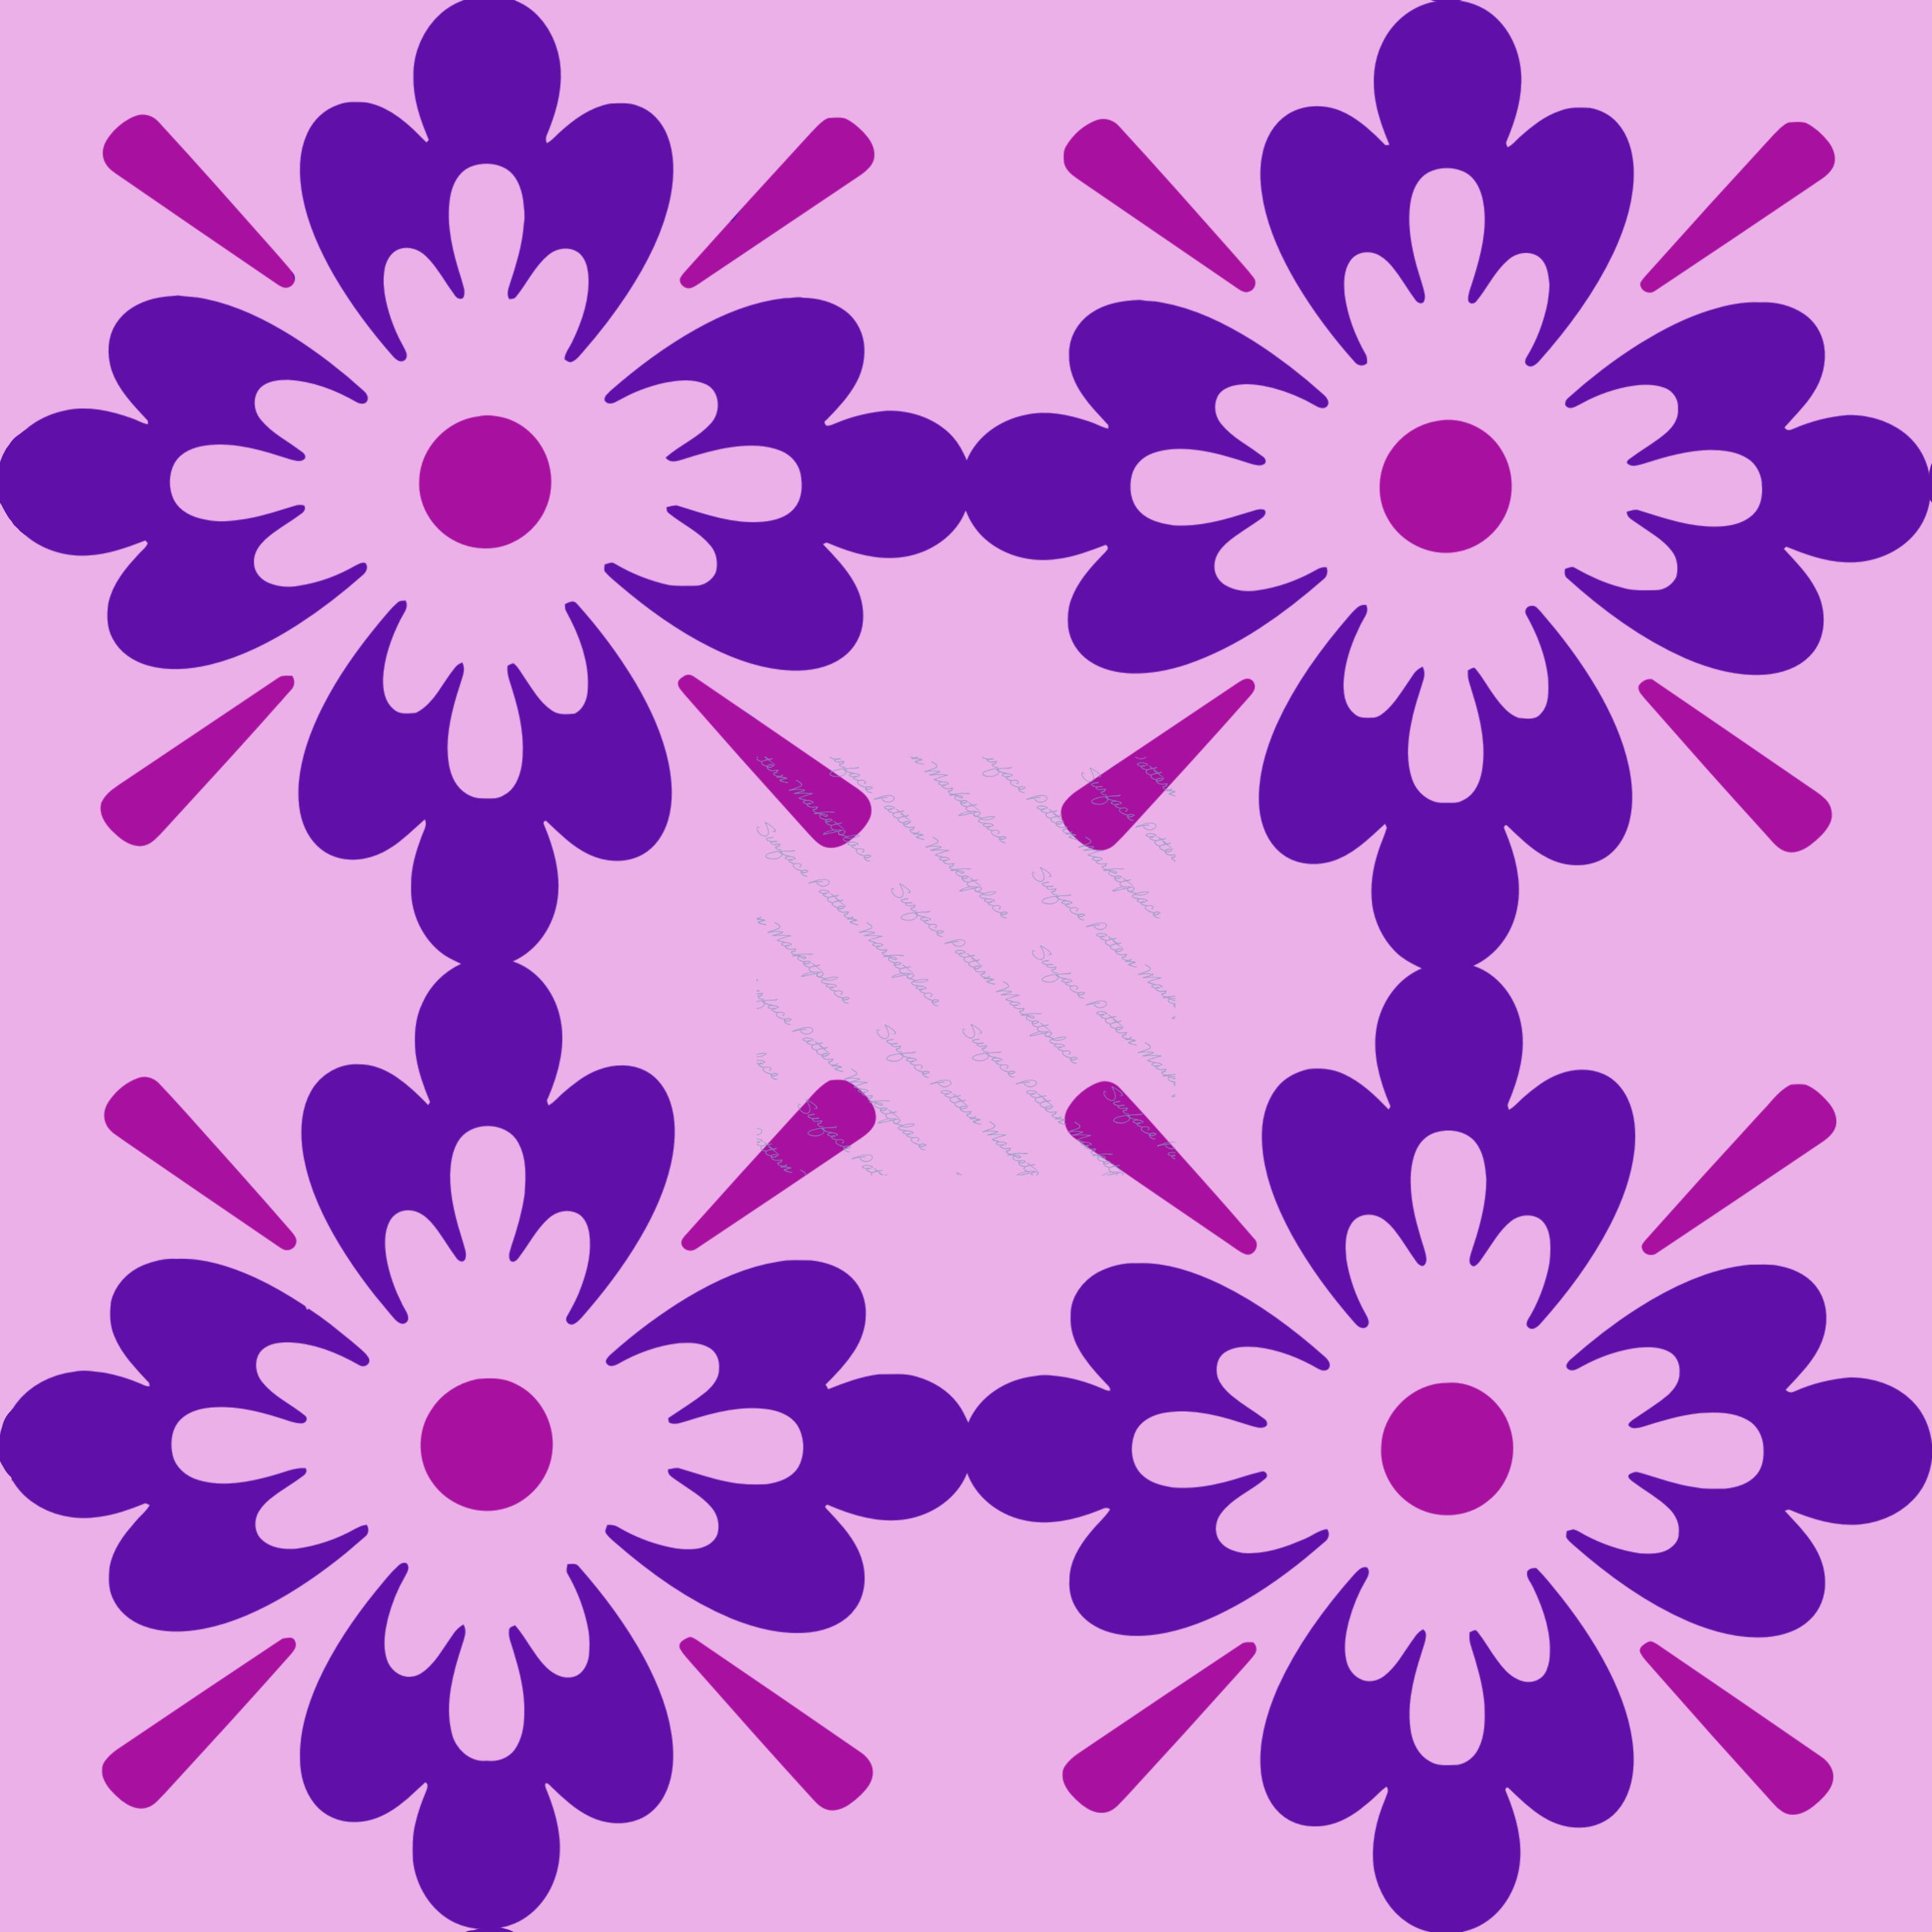 Introducing our latest collection of pink and purple flower patterns for textile design. Each pattern is thoughtfully crafted to bring a touch of natural beauty to your creations.